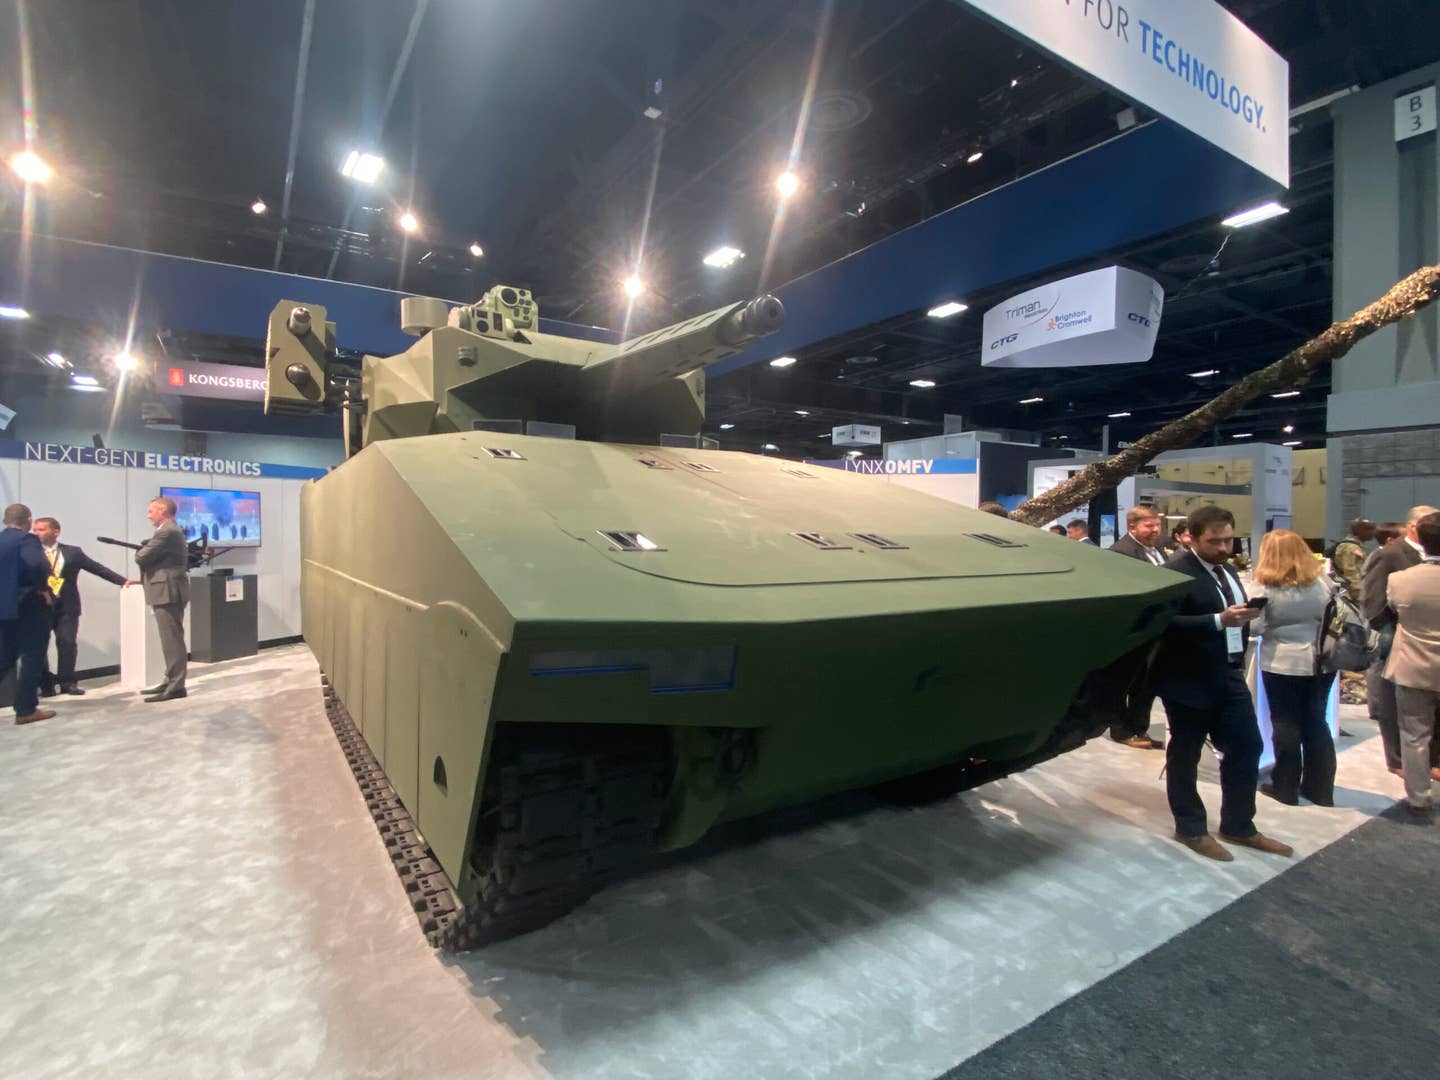 The Lynx OMFV concept demonstrator on display at the Rheinmetall booth during this year's AUSA conference. <em>Credit: Dan Parsons</em>